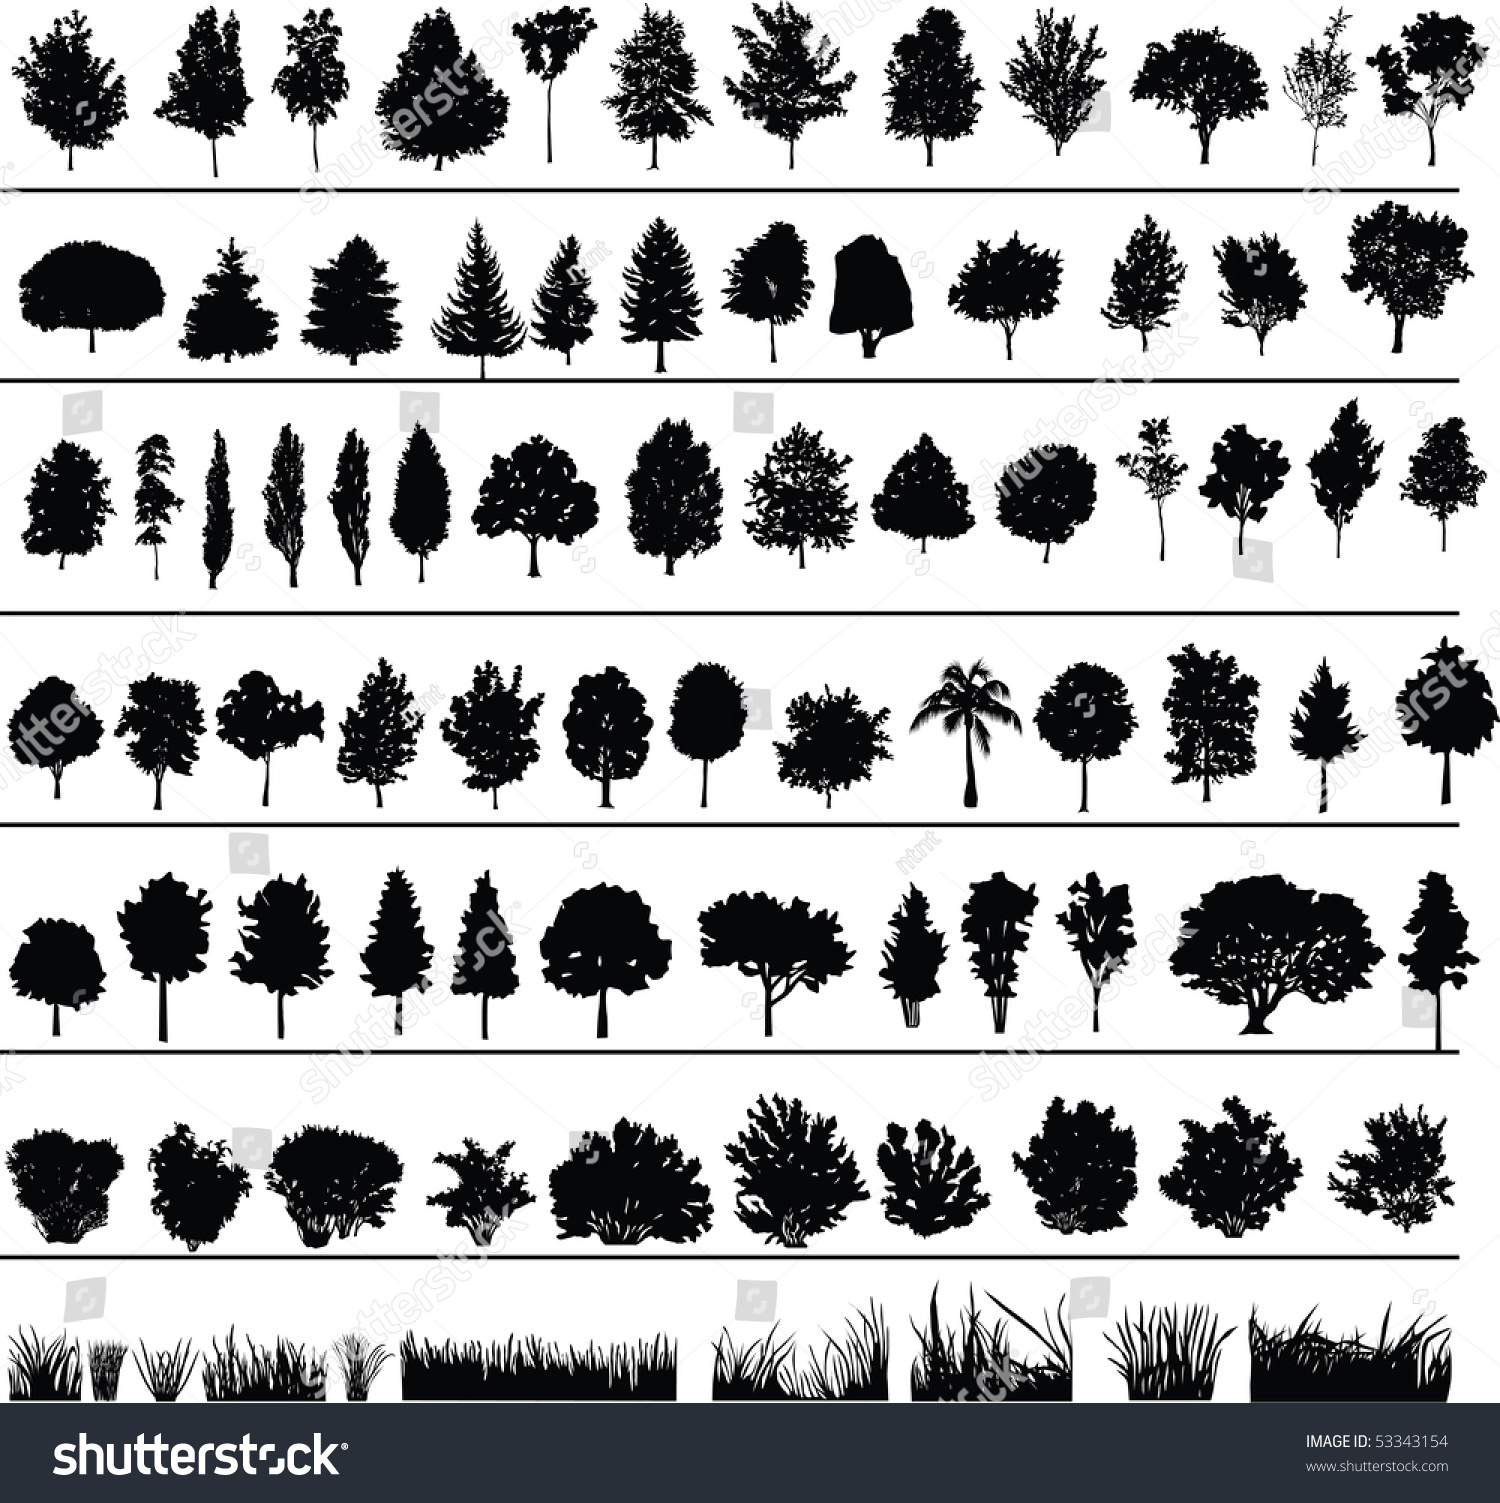 SVG of Set of silhouettes of trees, bushes and grass svg